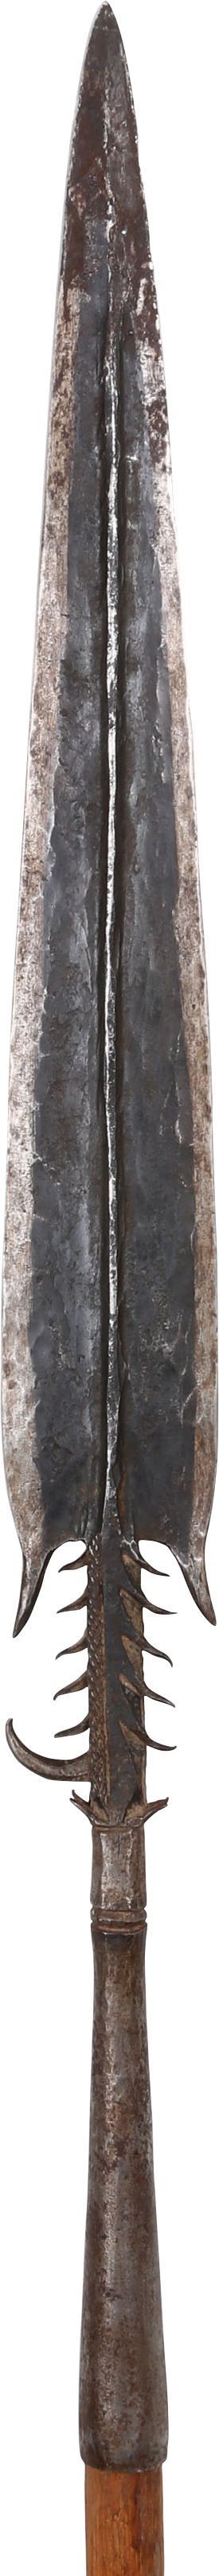 SUDANESE INFANTRY SPEAR C.1880 - Fagan Arms